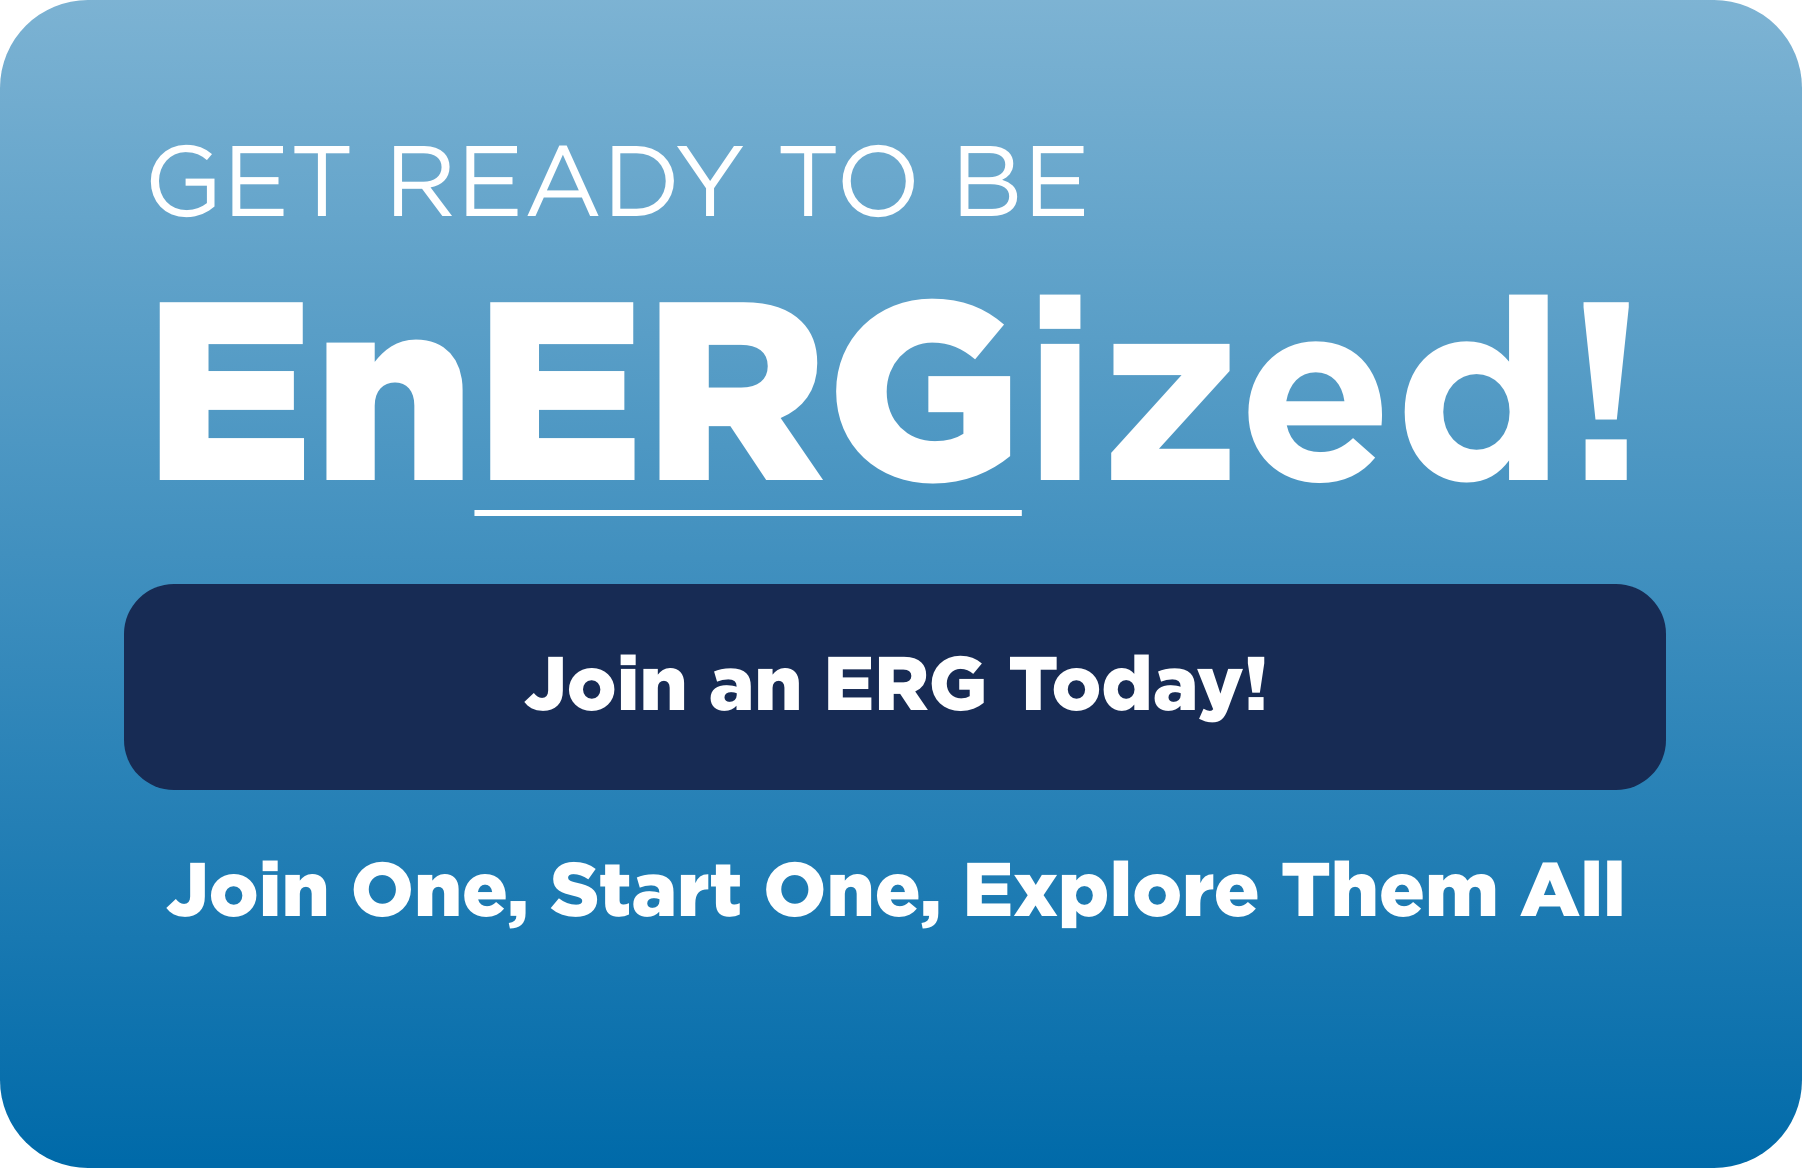 Get Ready to be Energized